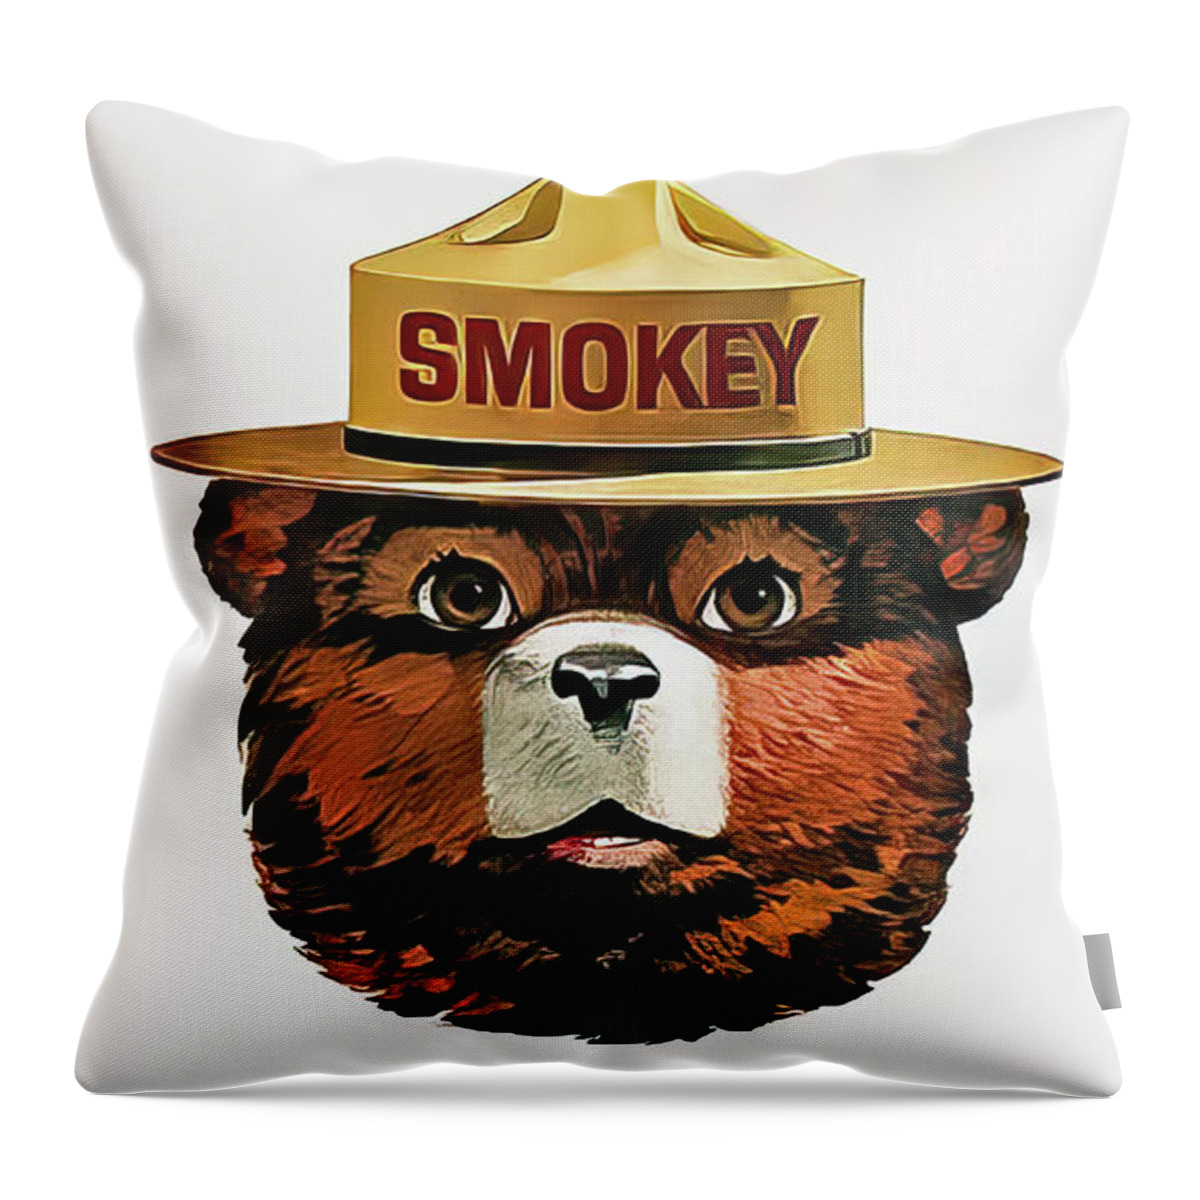 Smokey Throw Pillow featuring the drawing Smokey the Bear Fire Prevention by M G Whittingham